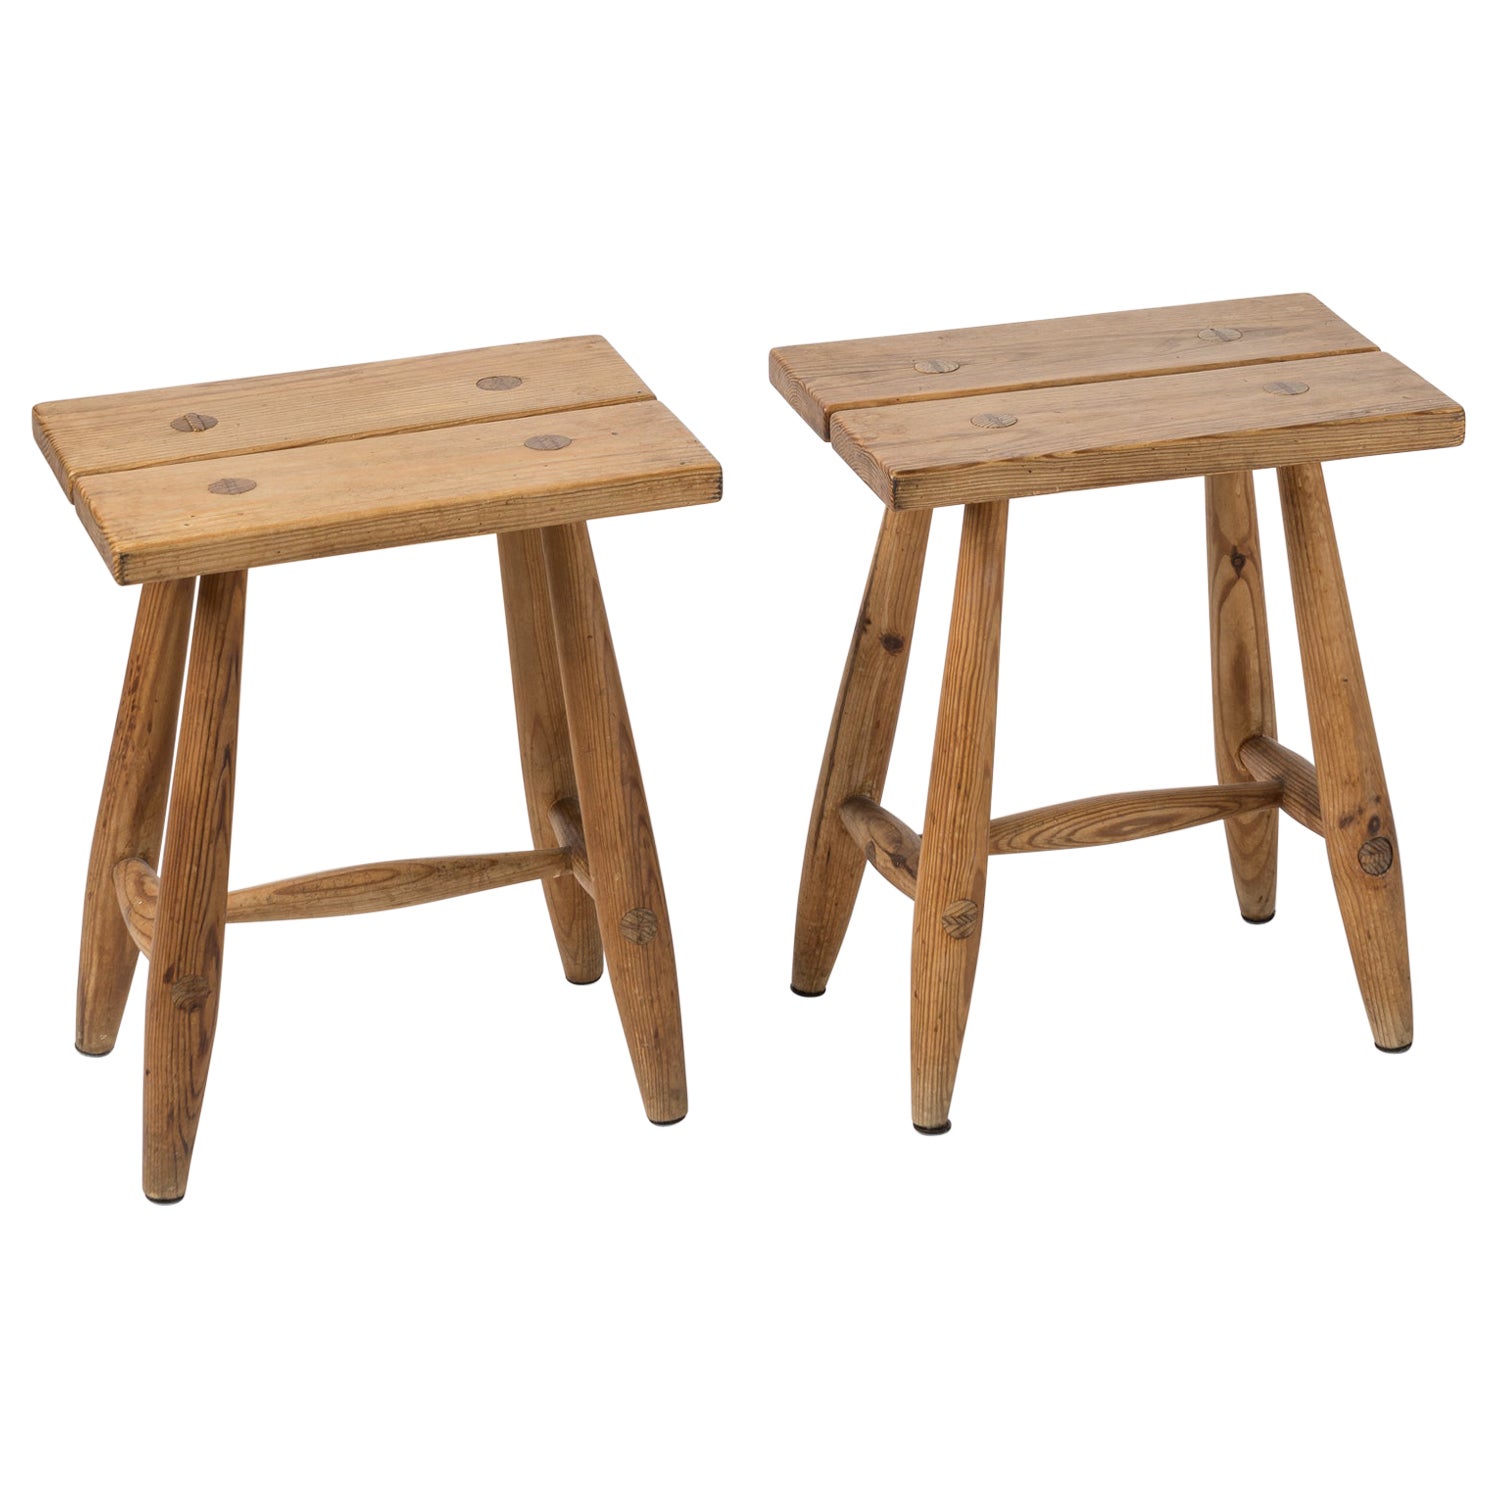 Pair of Minimalist Pinewood Stools, France, 1970s For Sale